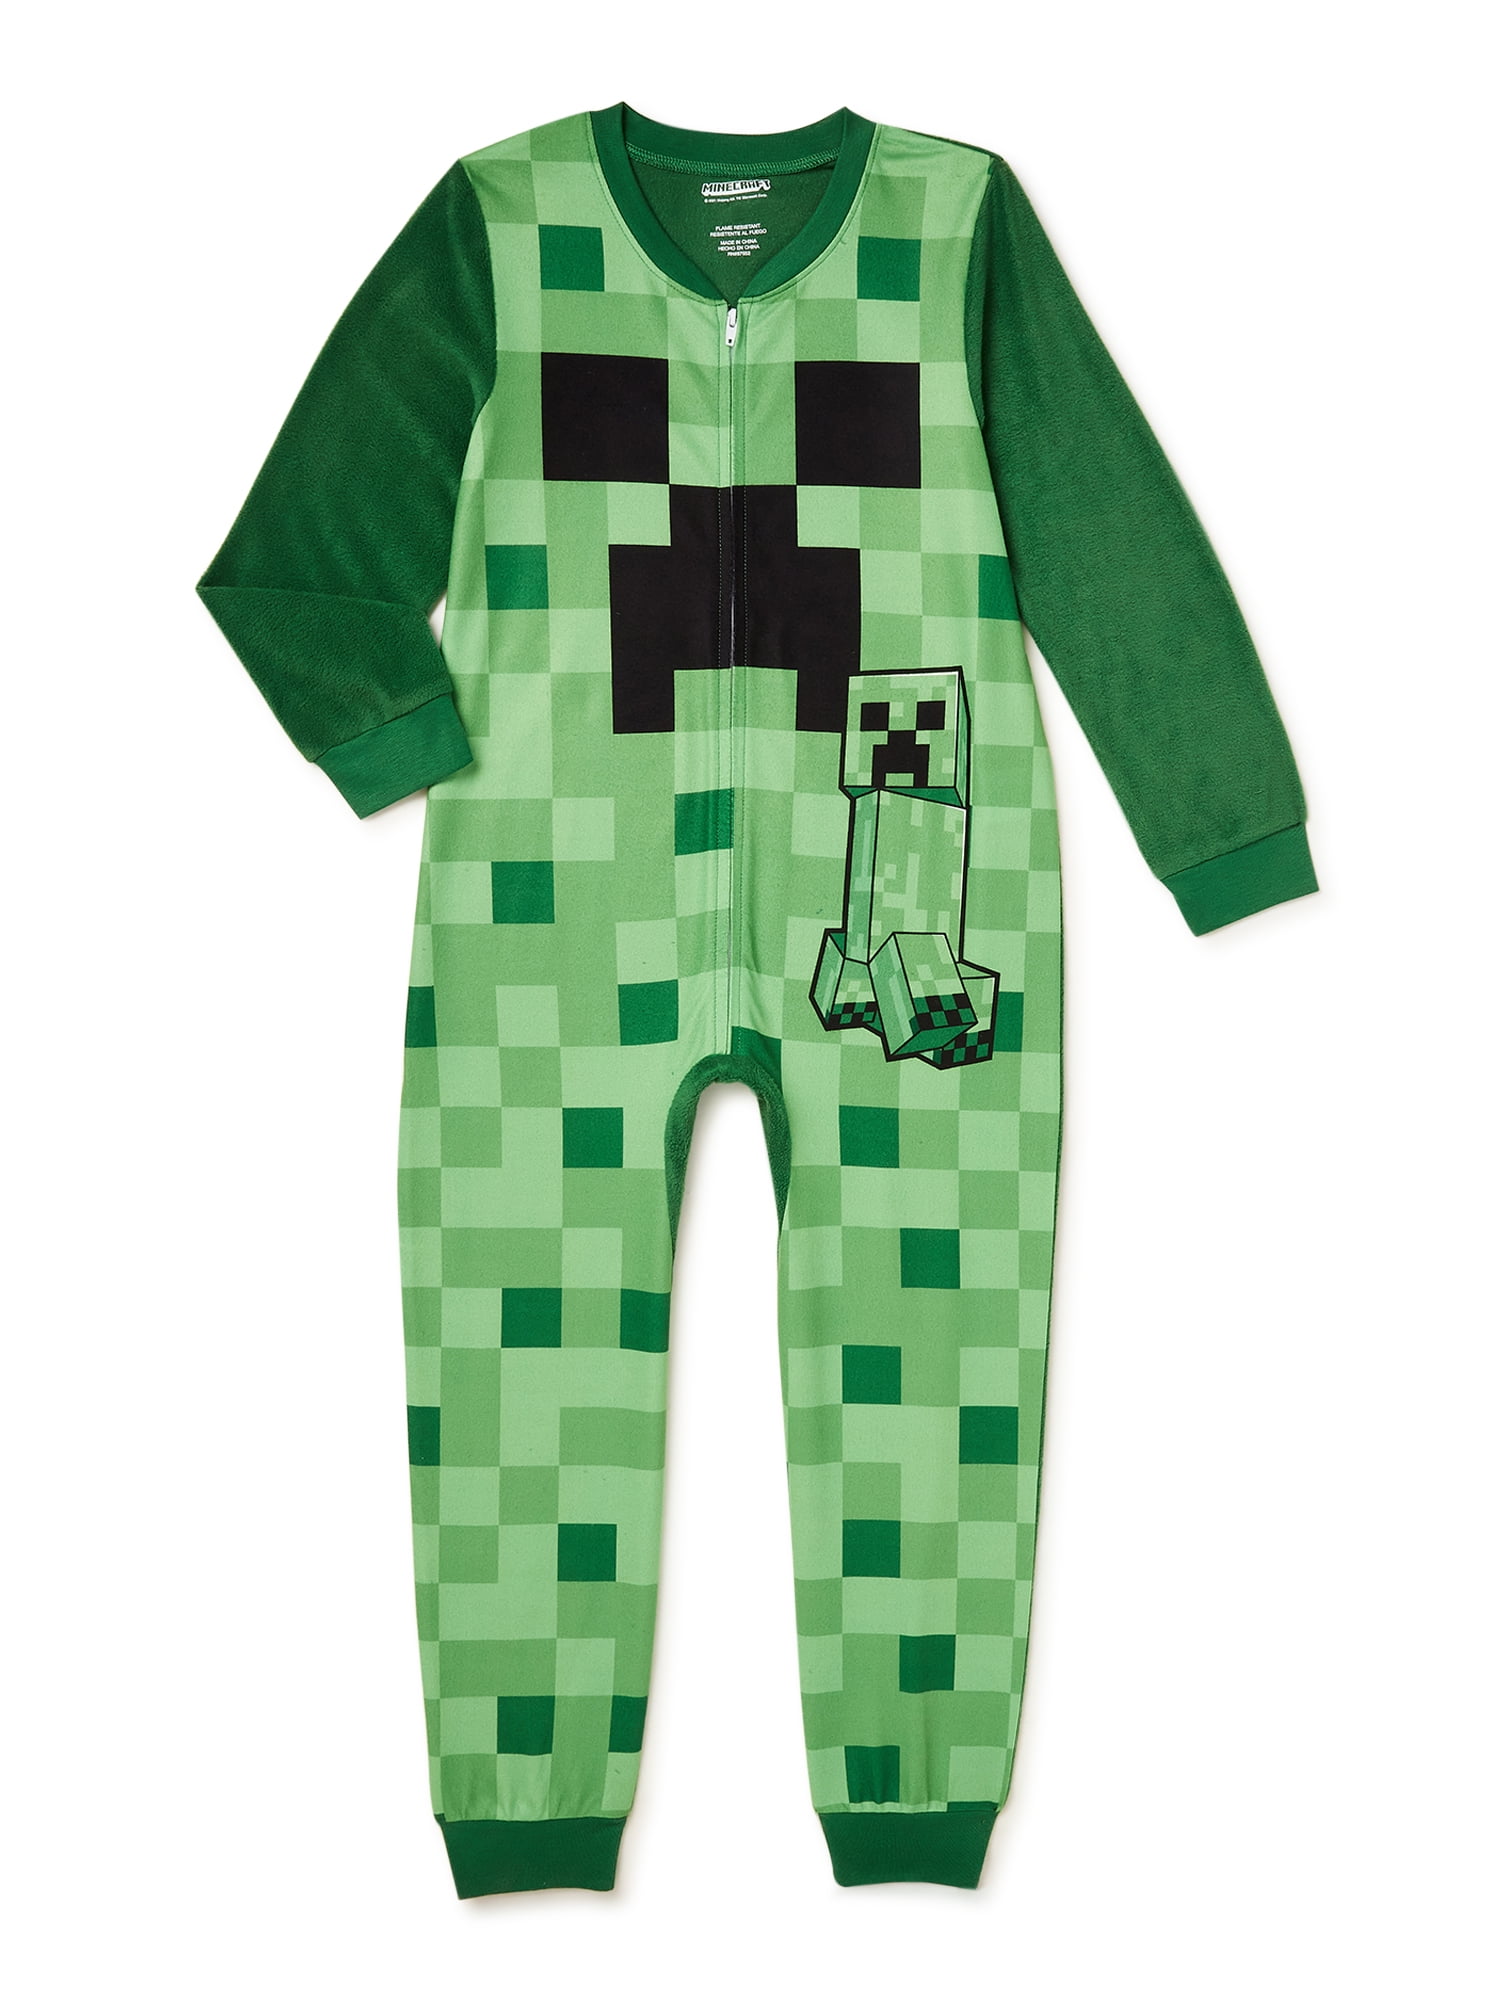 Video Gamer Lounge Wear All In One 100% Cotton Sleepsuit 